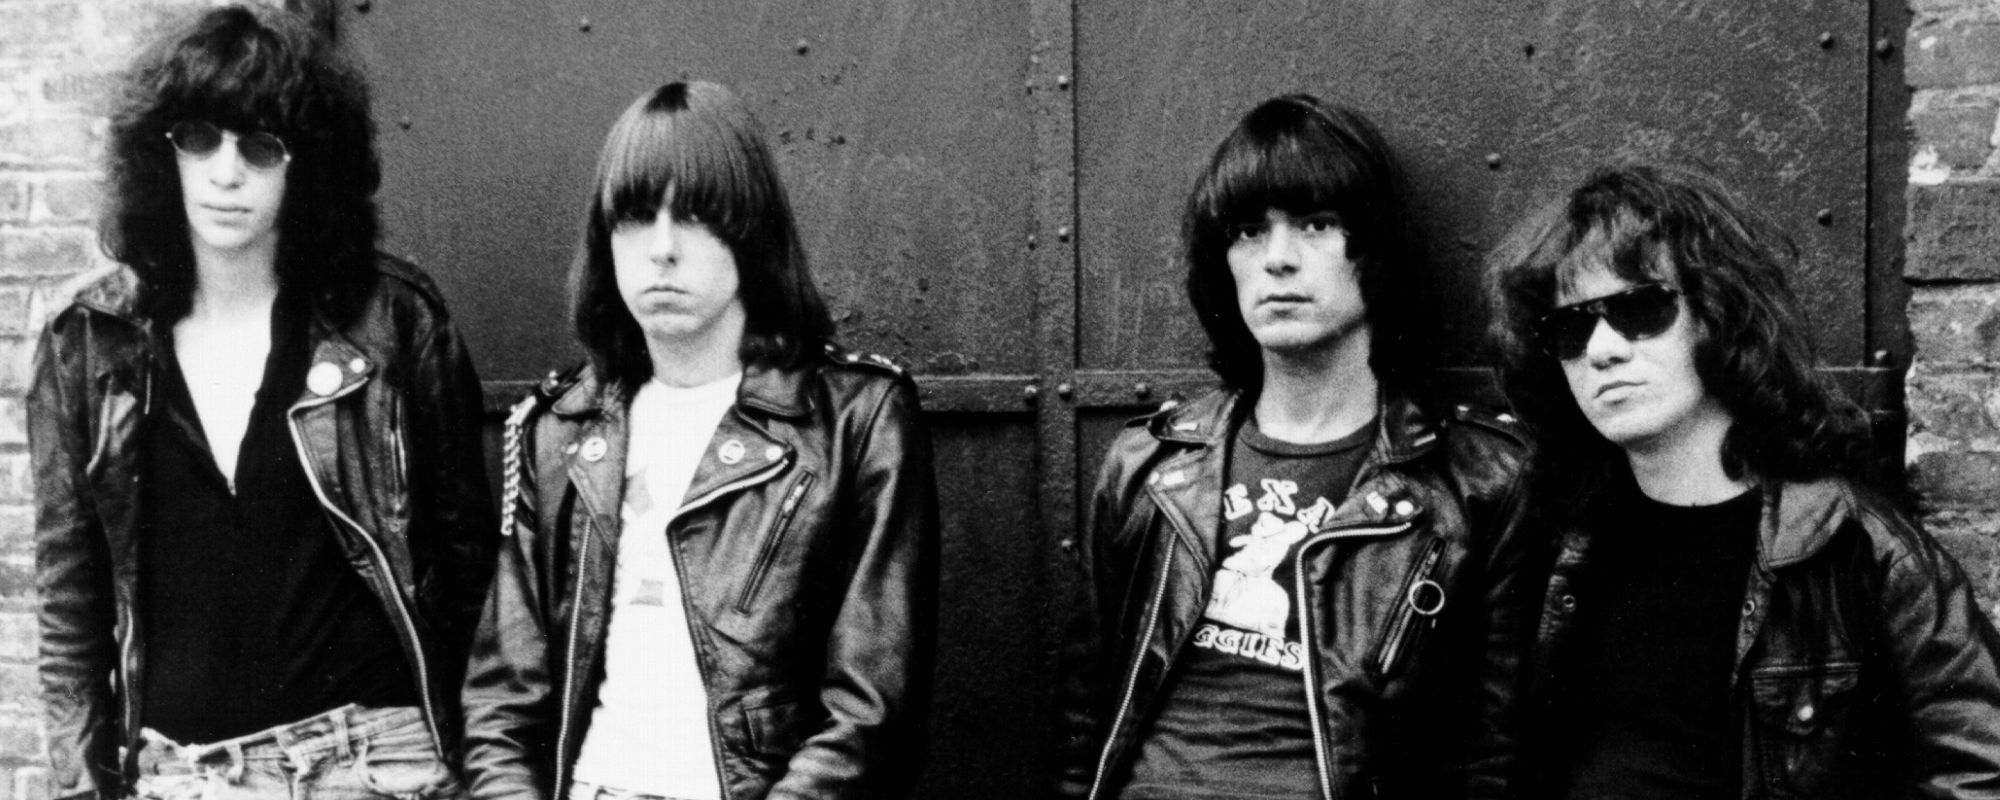 5 Little-Known Facts About The Ramones’ Debut, Released On This Day in 1976